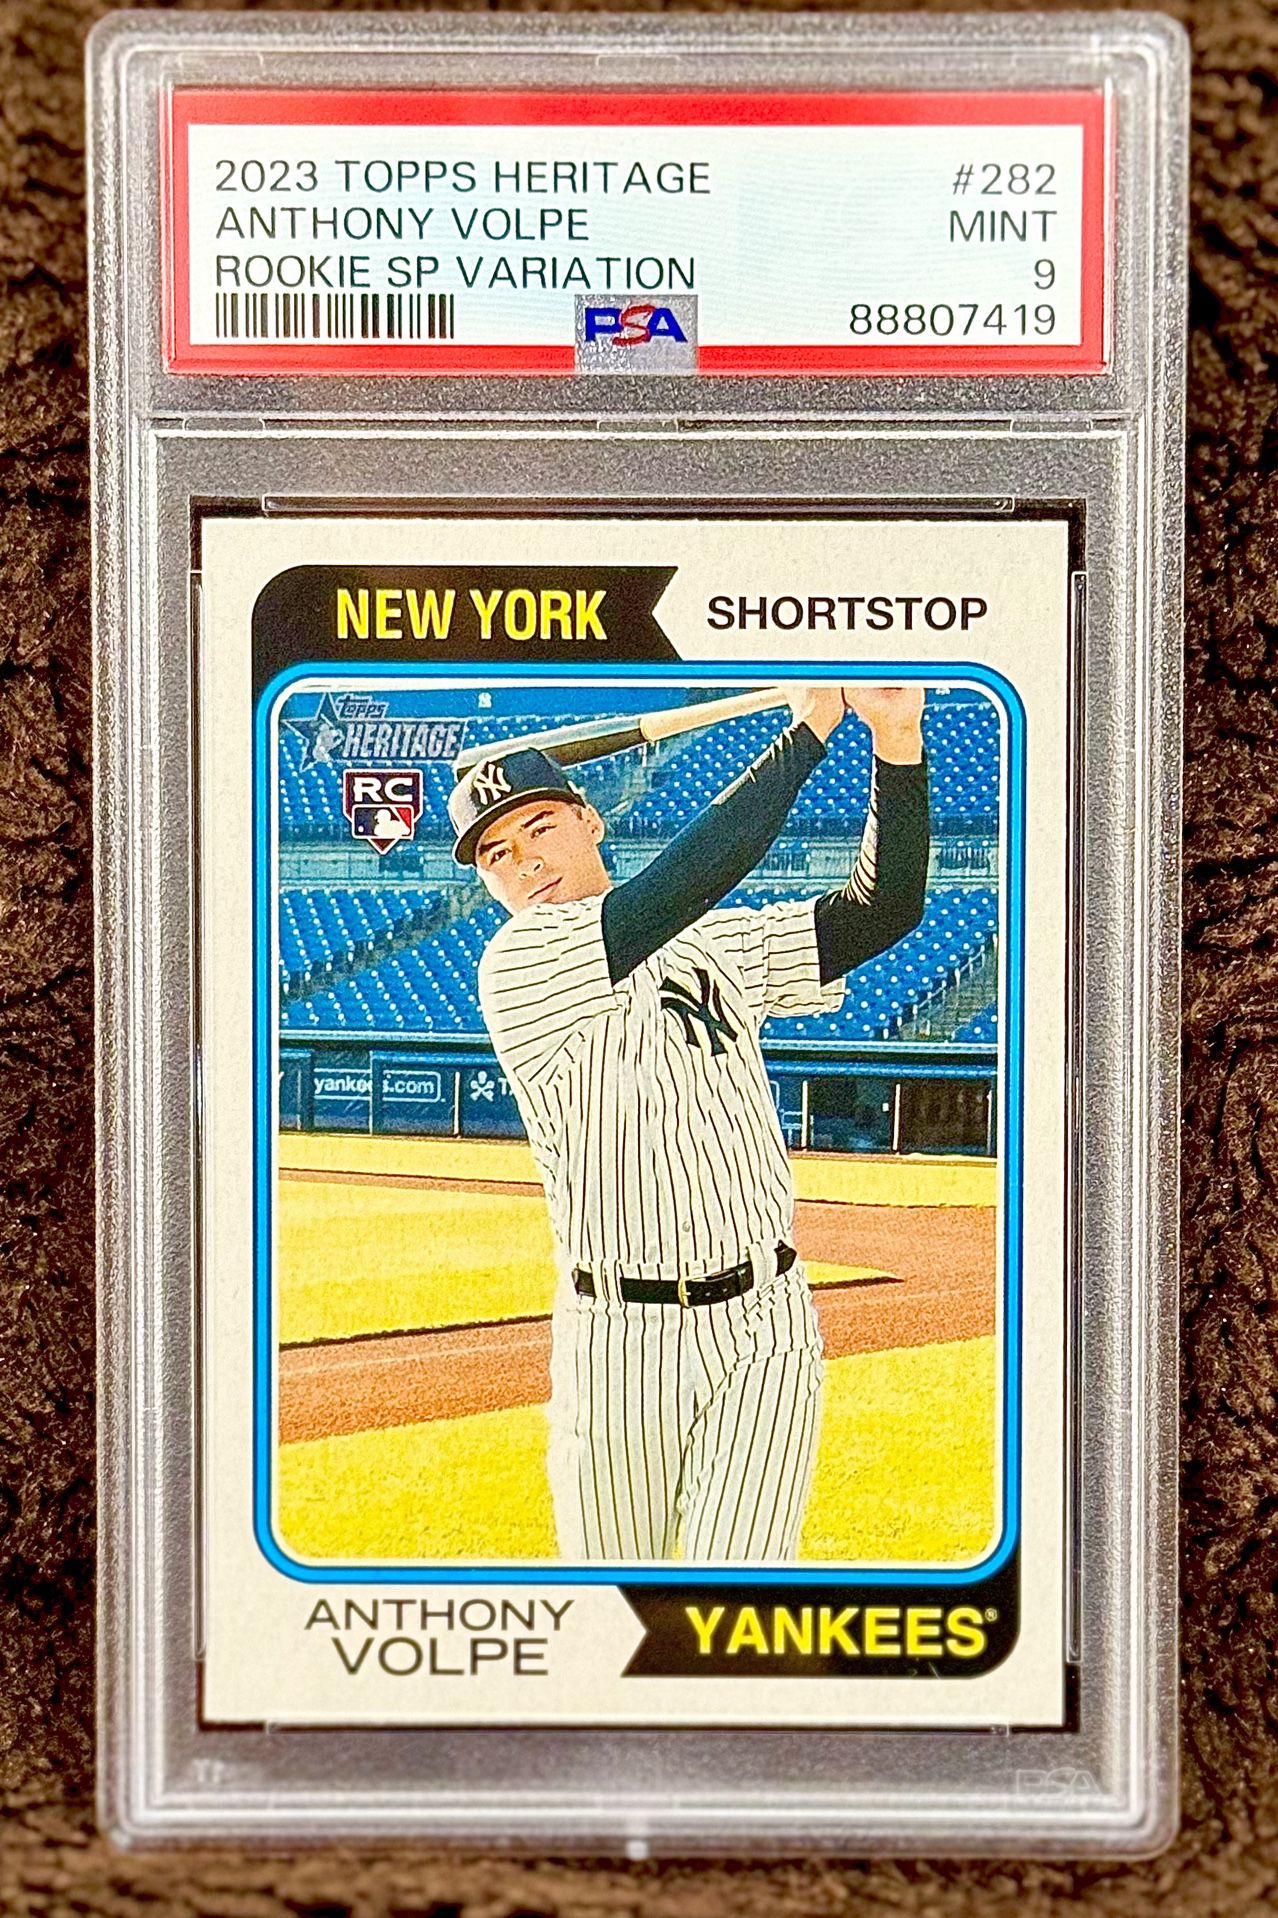 2023 Topps Heritage #282 Anthony Volpe Rookie SP Variation PSA 9